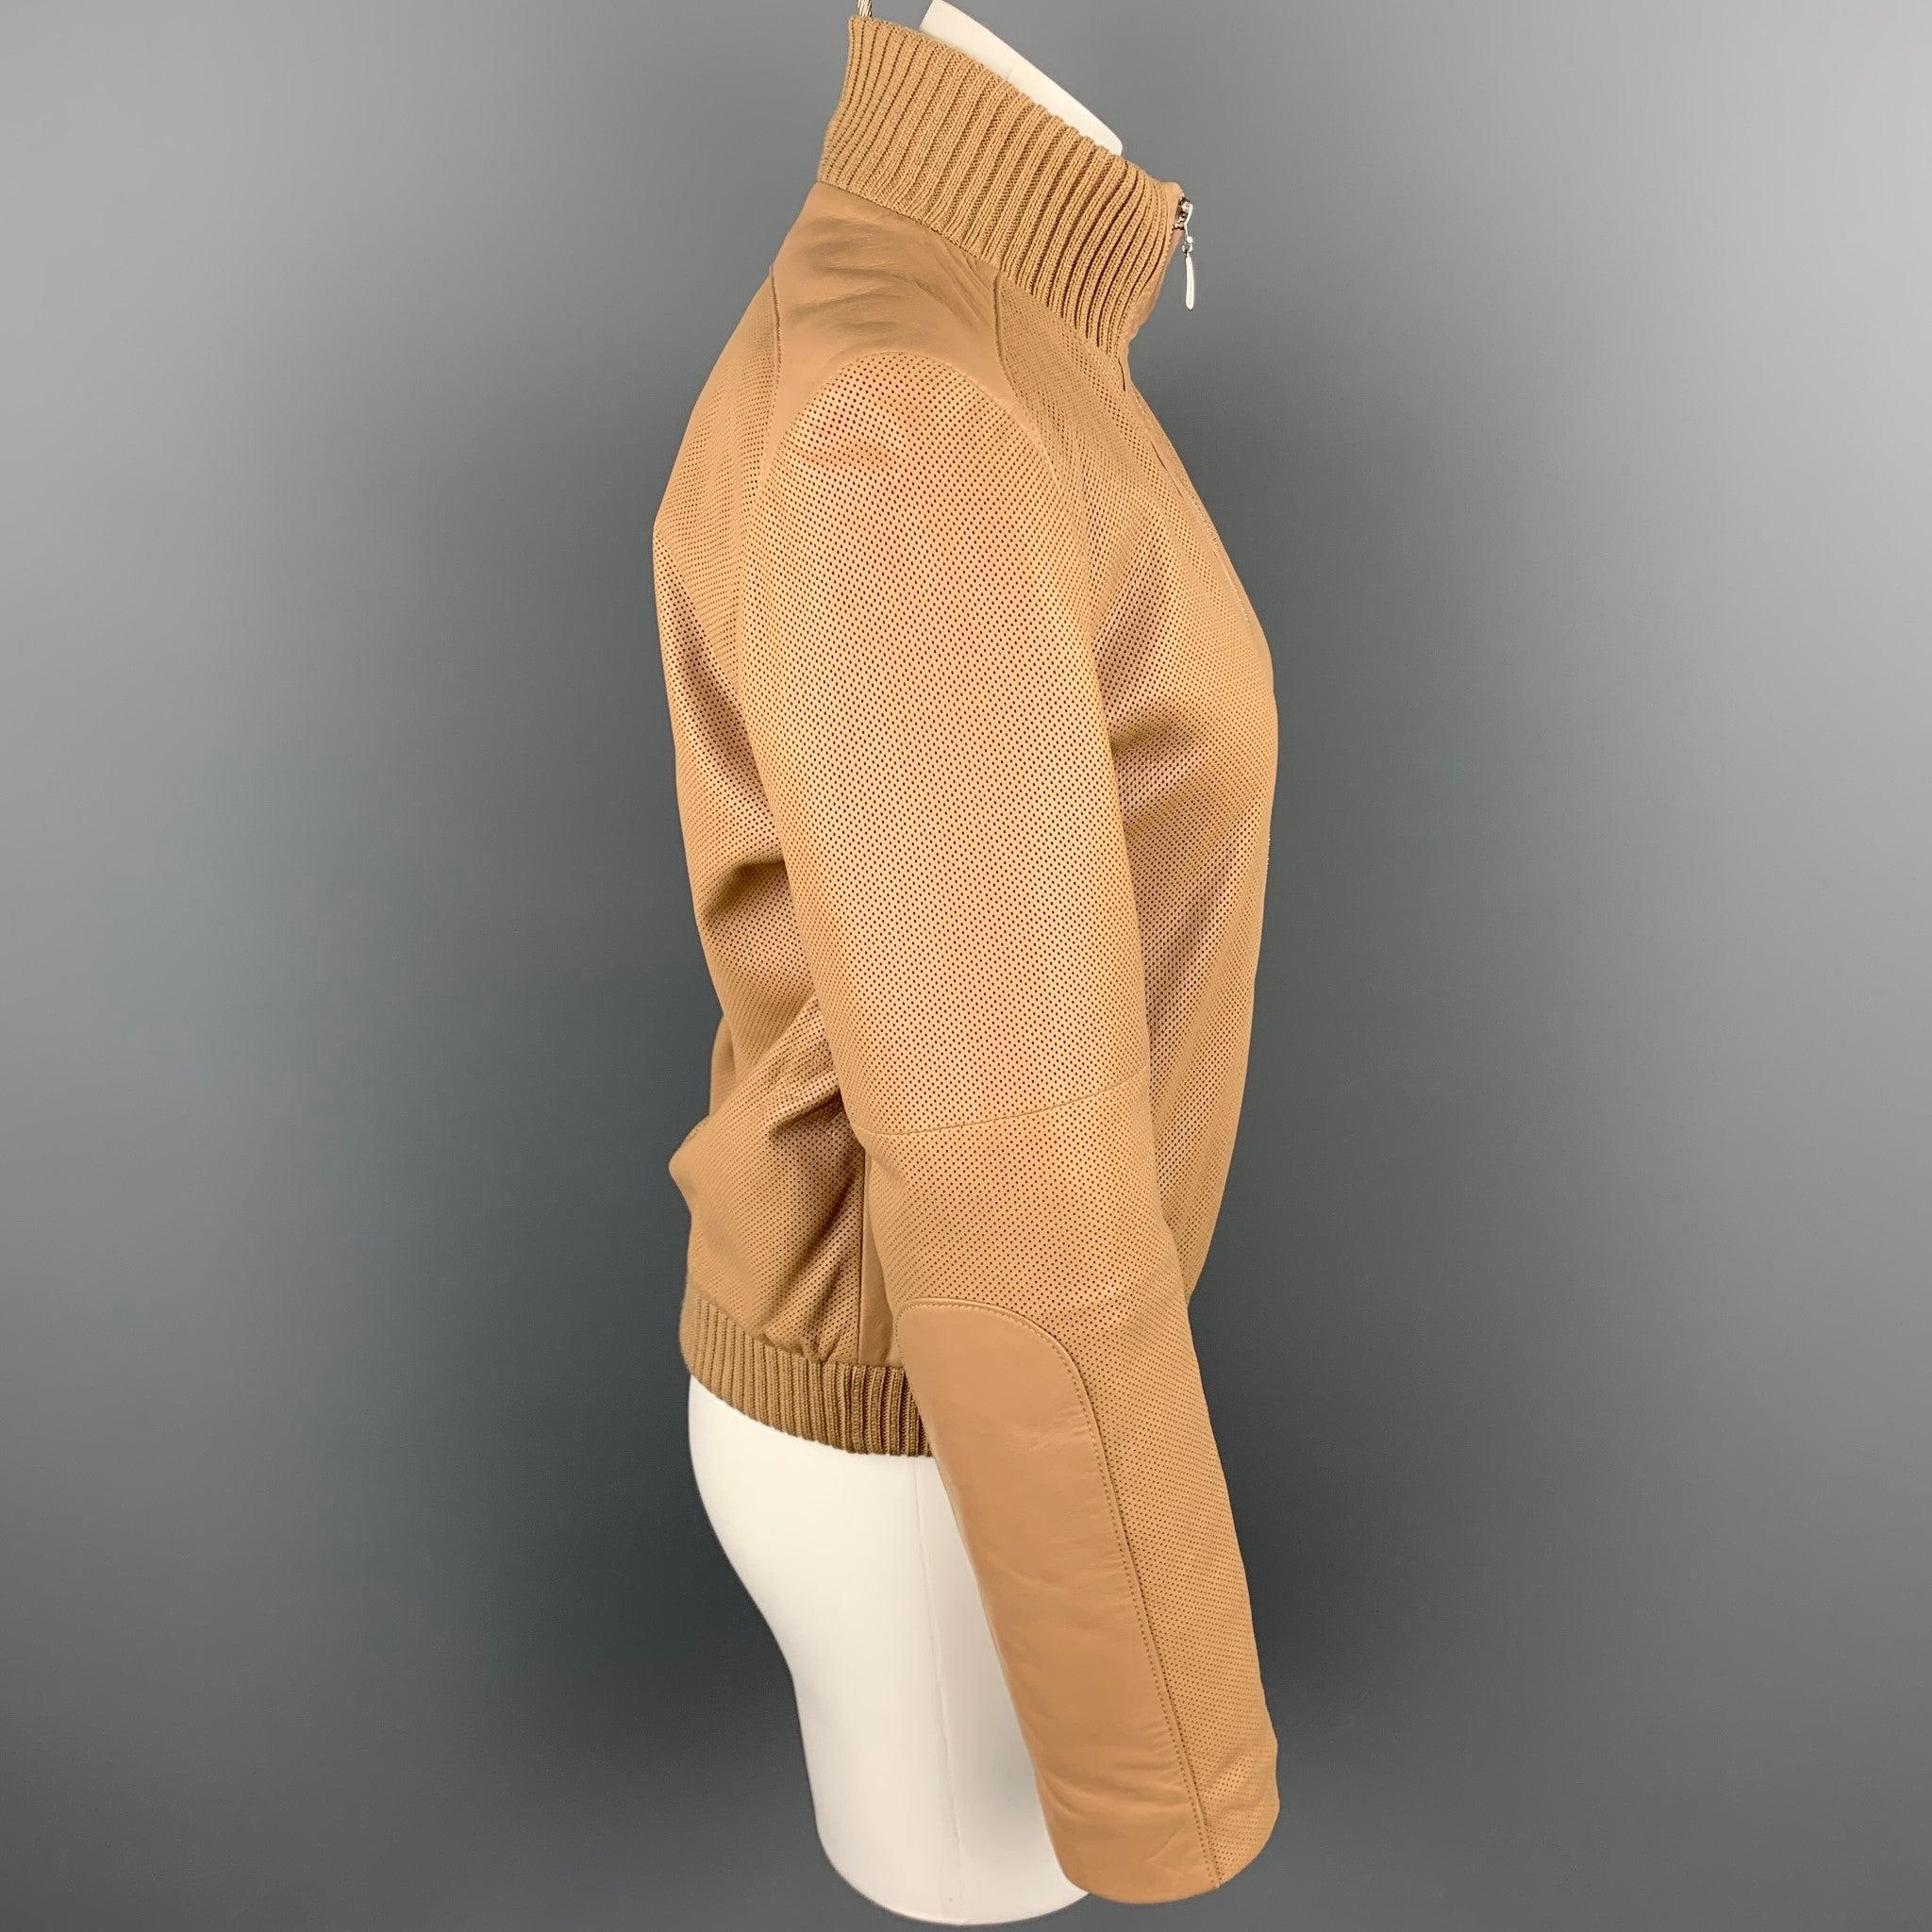 ESCADA jacket comes in a beige perforated leather with a quilted liner featuring a bomber style, wool sleeves, slit pockets, and a zip up closure.
Very Good
Pre-Owned Condition. 

Marked:   34 

Measurements: 
 
Shoulder: 16 inches  Bust: 36 inches 